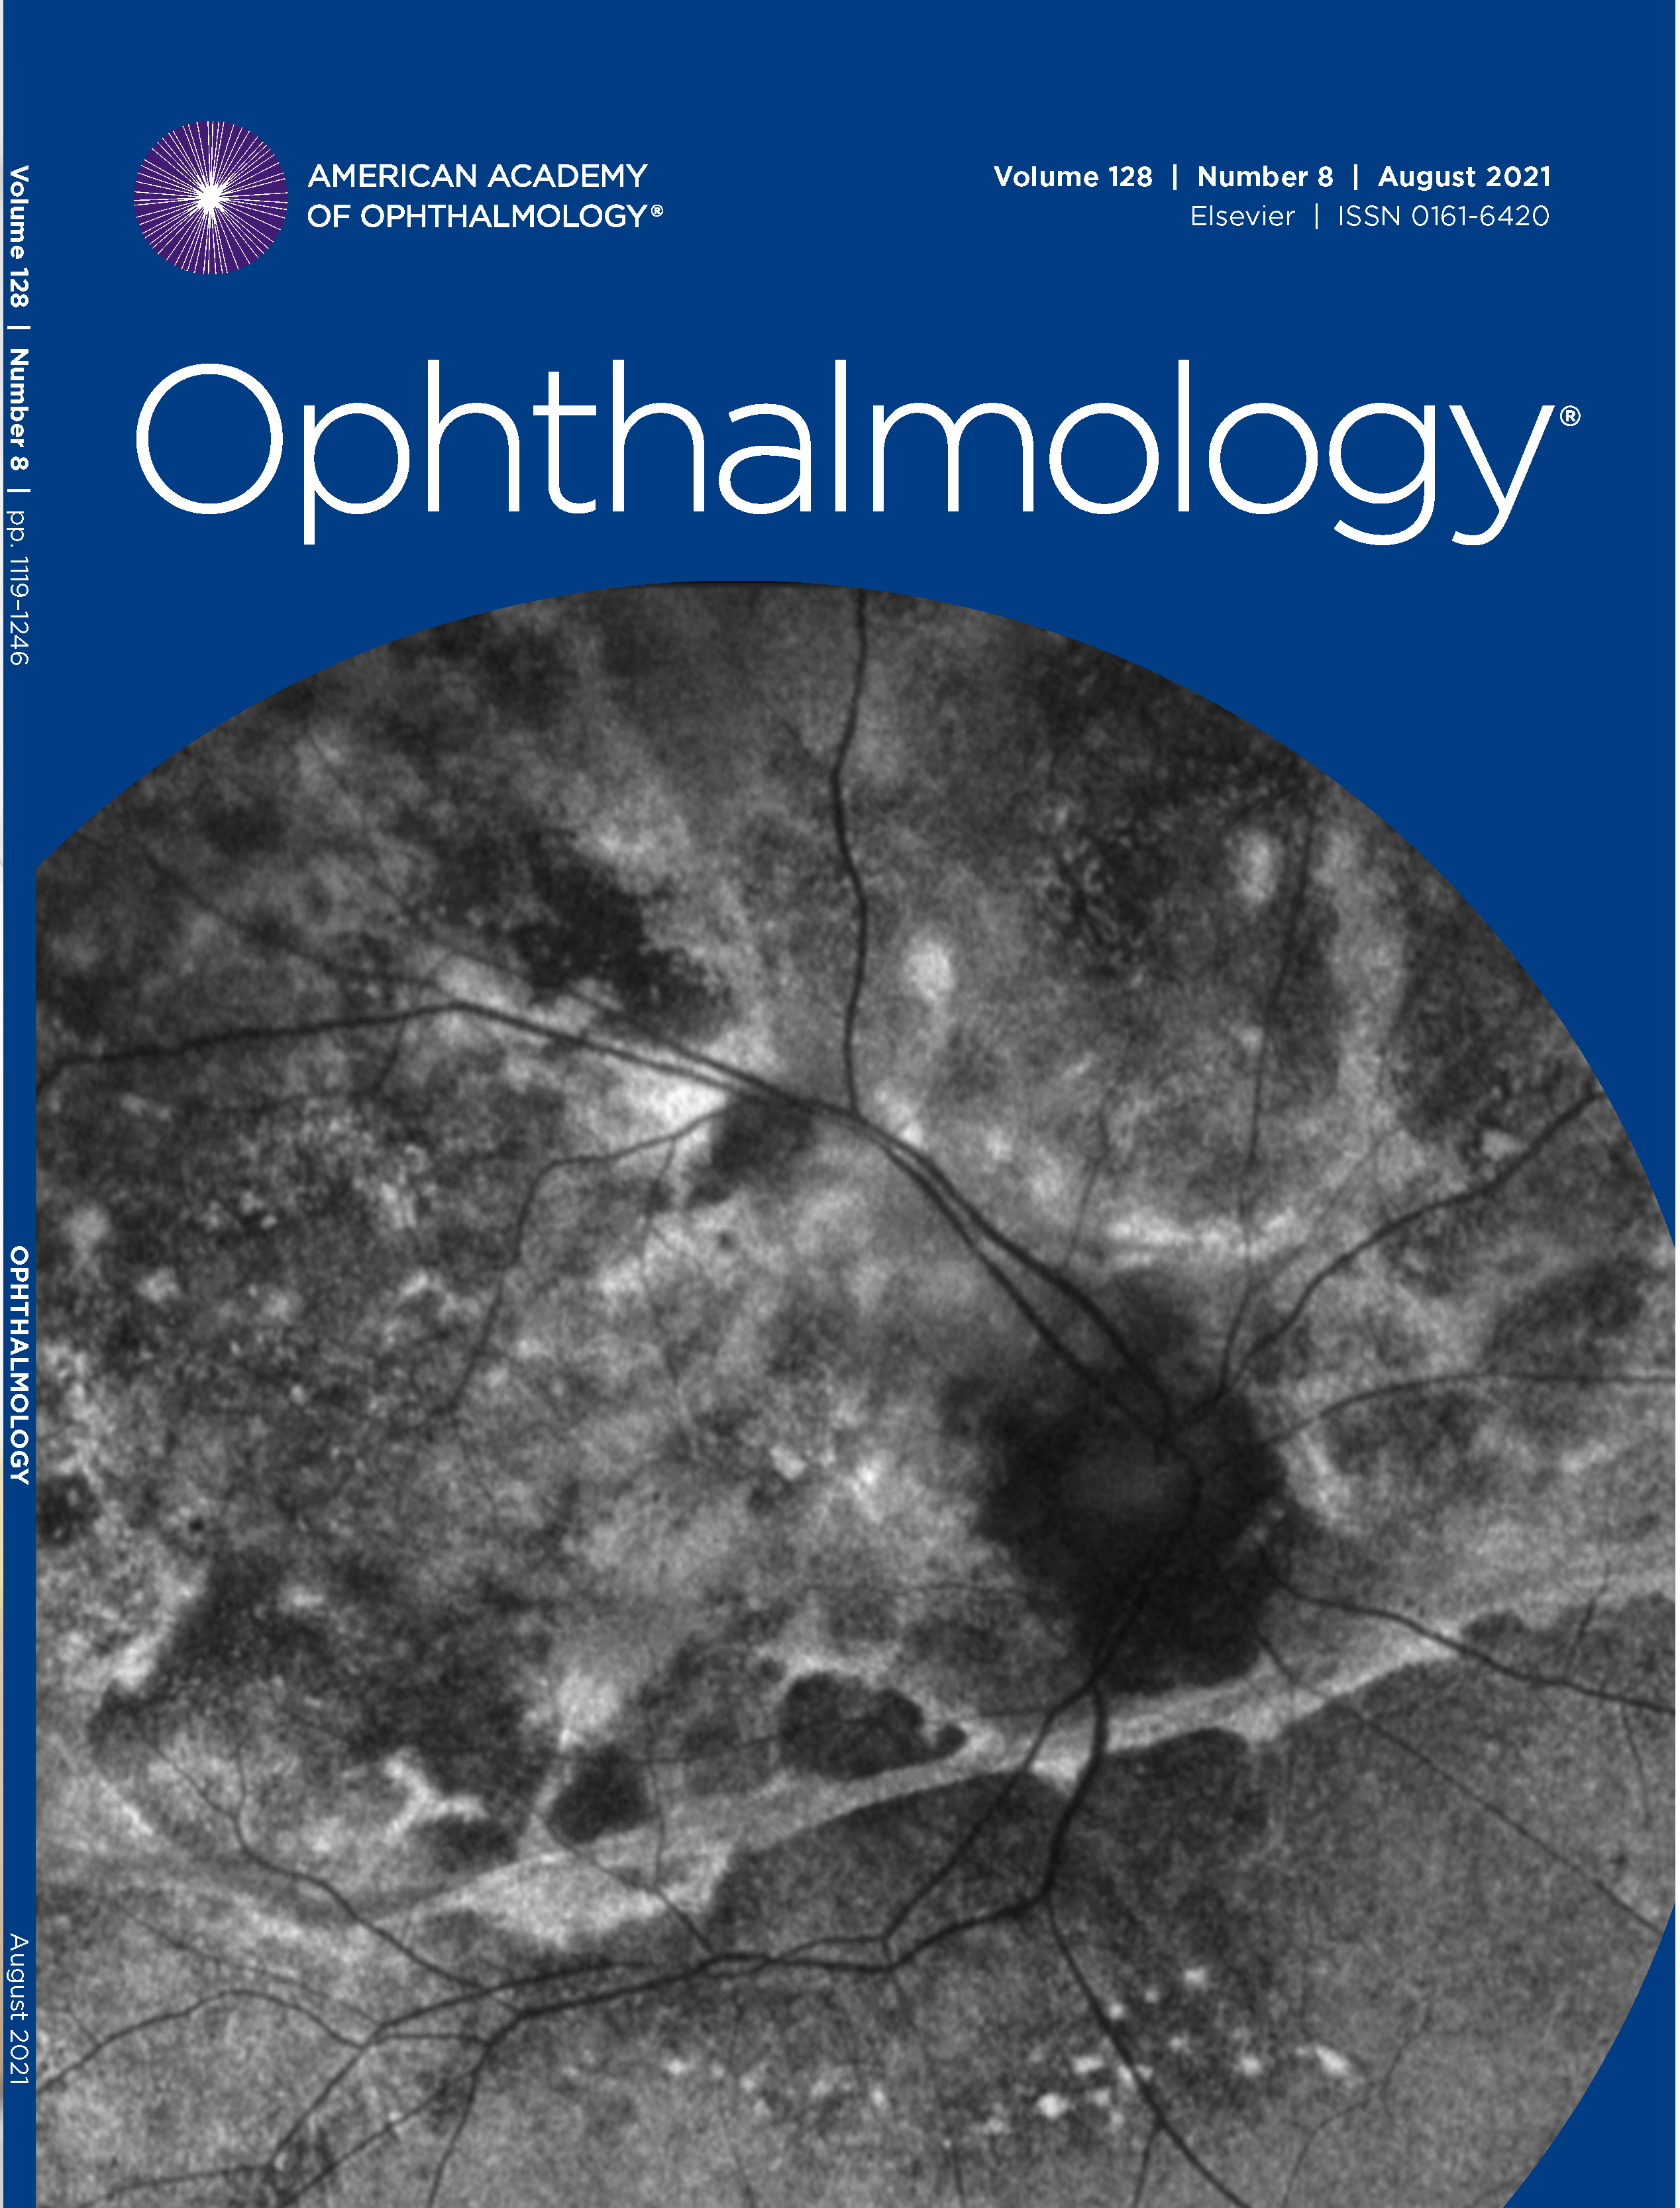 Ophthalmology August 2021 - Volume 128, Issue 8 image